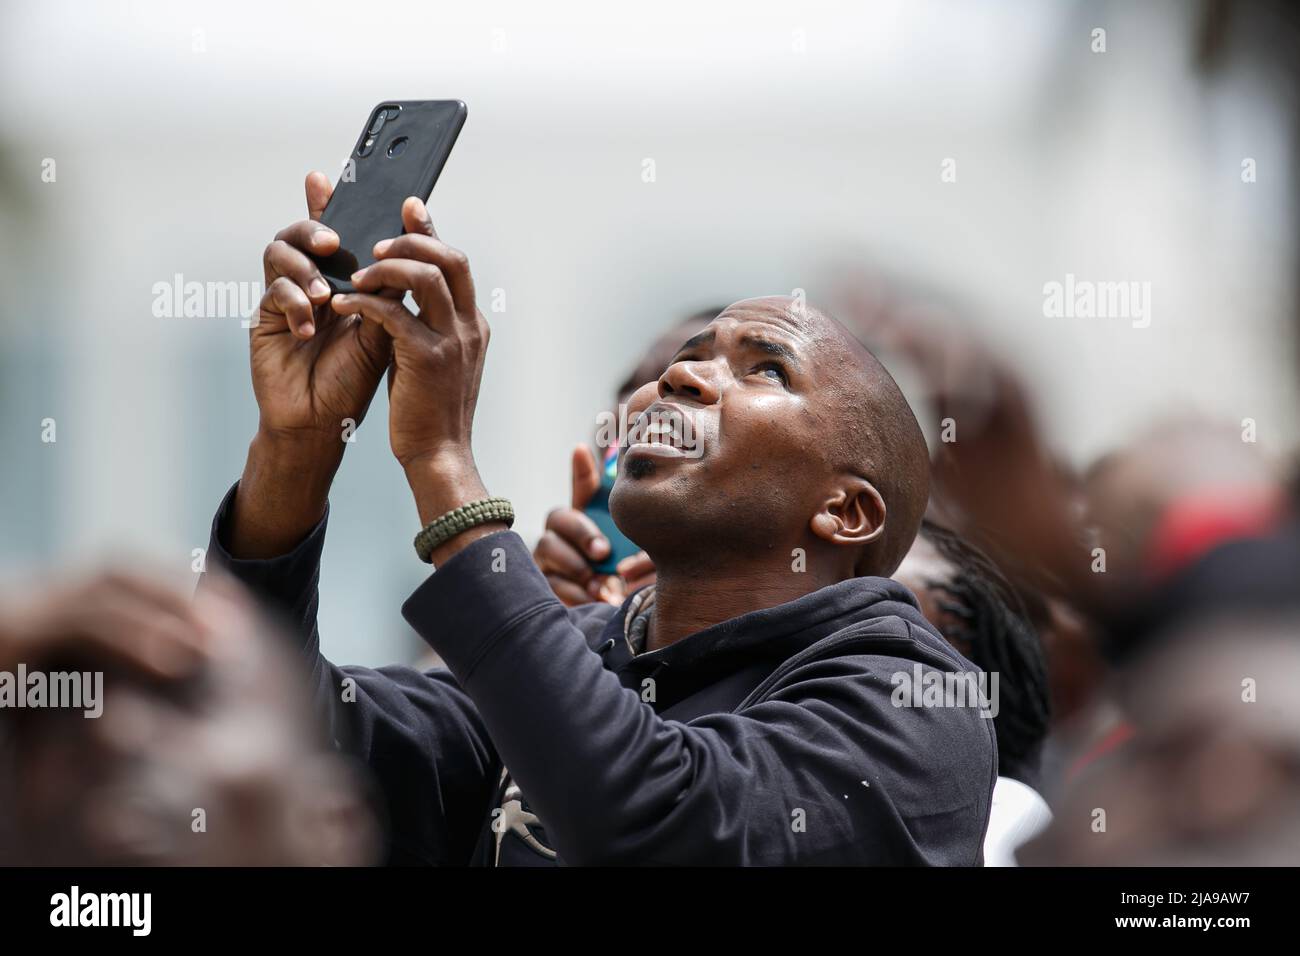 Nairobi, Kenya. 28th May, 2022. A Kenyan man video records with his phone the happenings of the day at the Kenya Defence Forces Air Show at the Uhuru Gardens National Monument and Museum. The free Air Show was a forerunner of commissioning the Uhuru Gardens National Monument and Museum. It was led by Kenya Air Force and included the Kenya wildlife services and civilian aerobatic and sky diving teams. The aim was to entertain and educate the public. Credit: SOPA Images Limited/Alamy Live News Stock Photo